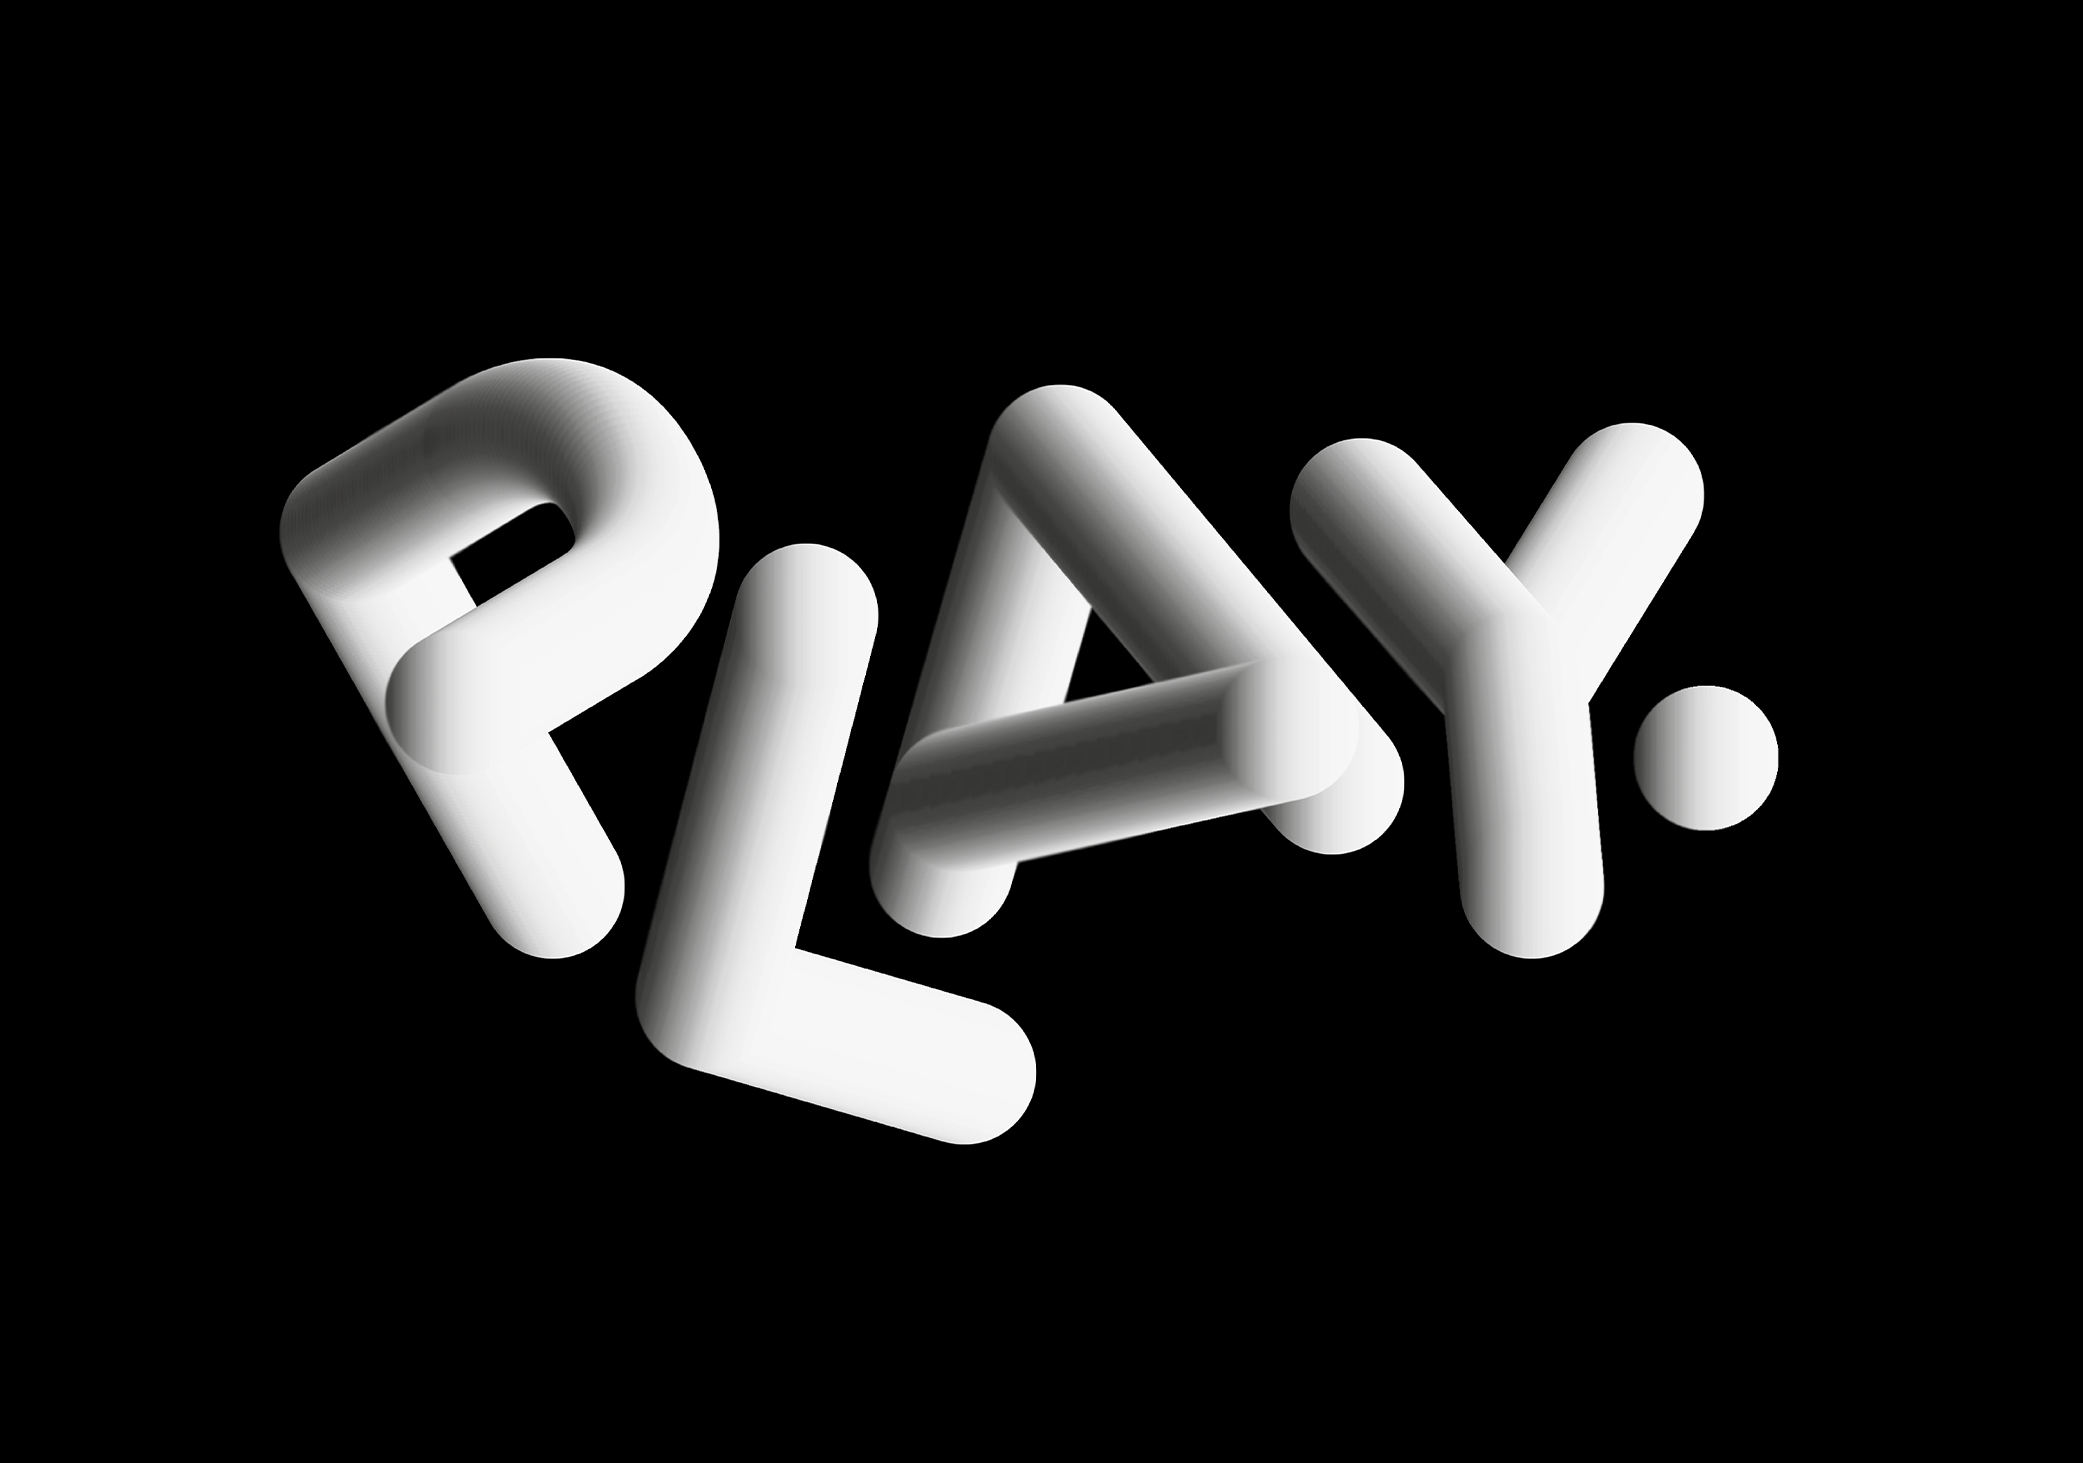 The word Play created in a 3D tube effect making the logo look rounded